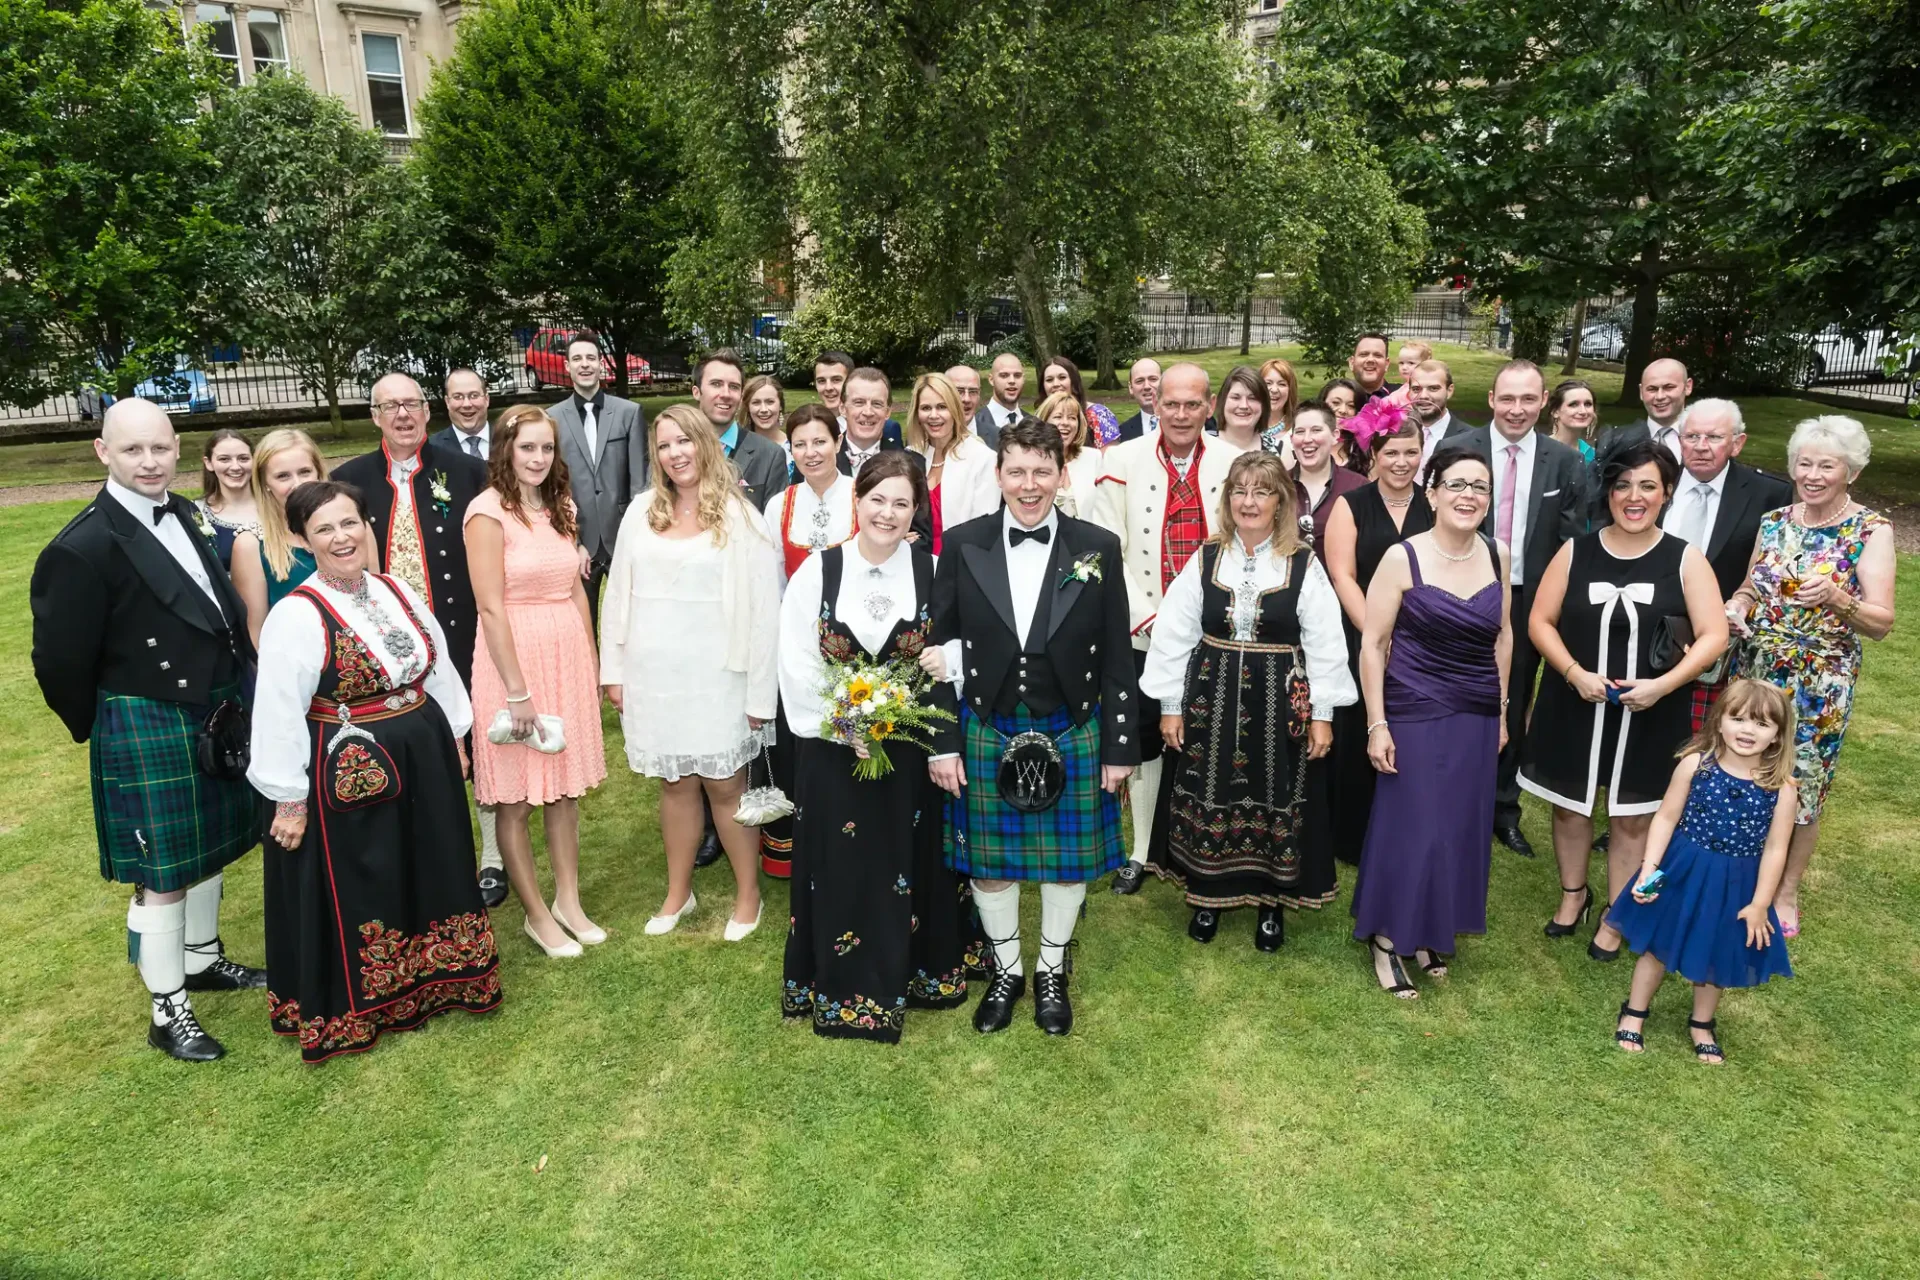 A group of people in formal attire, including kilts and suits, posing for a photo at a wedding outdoors.